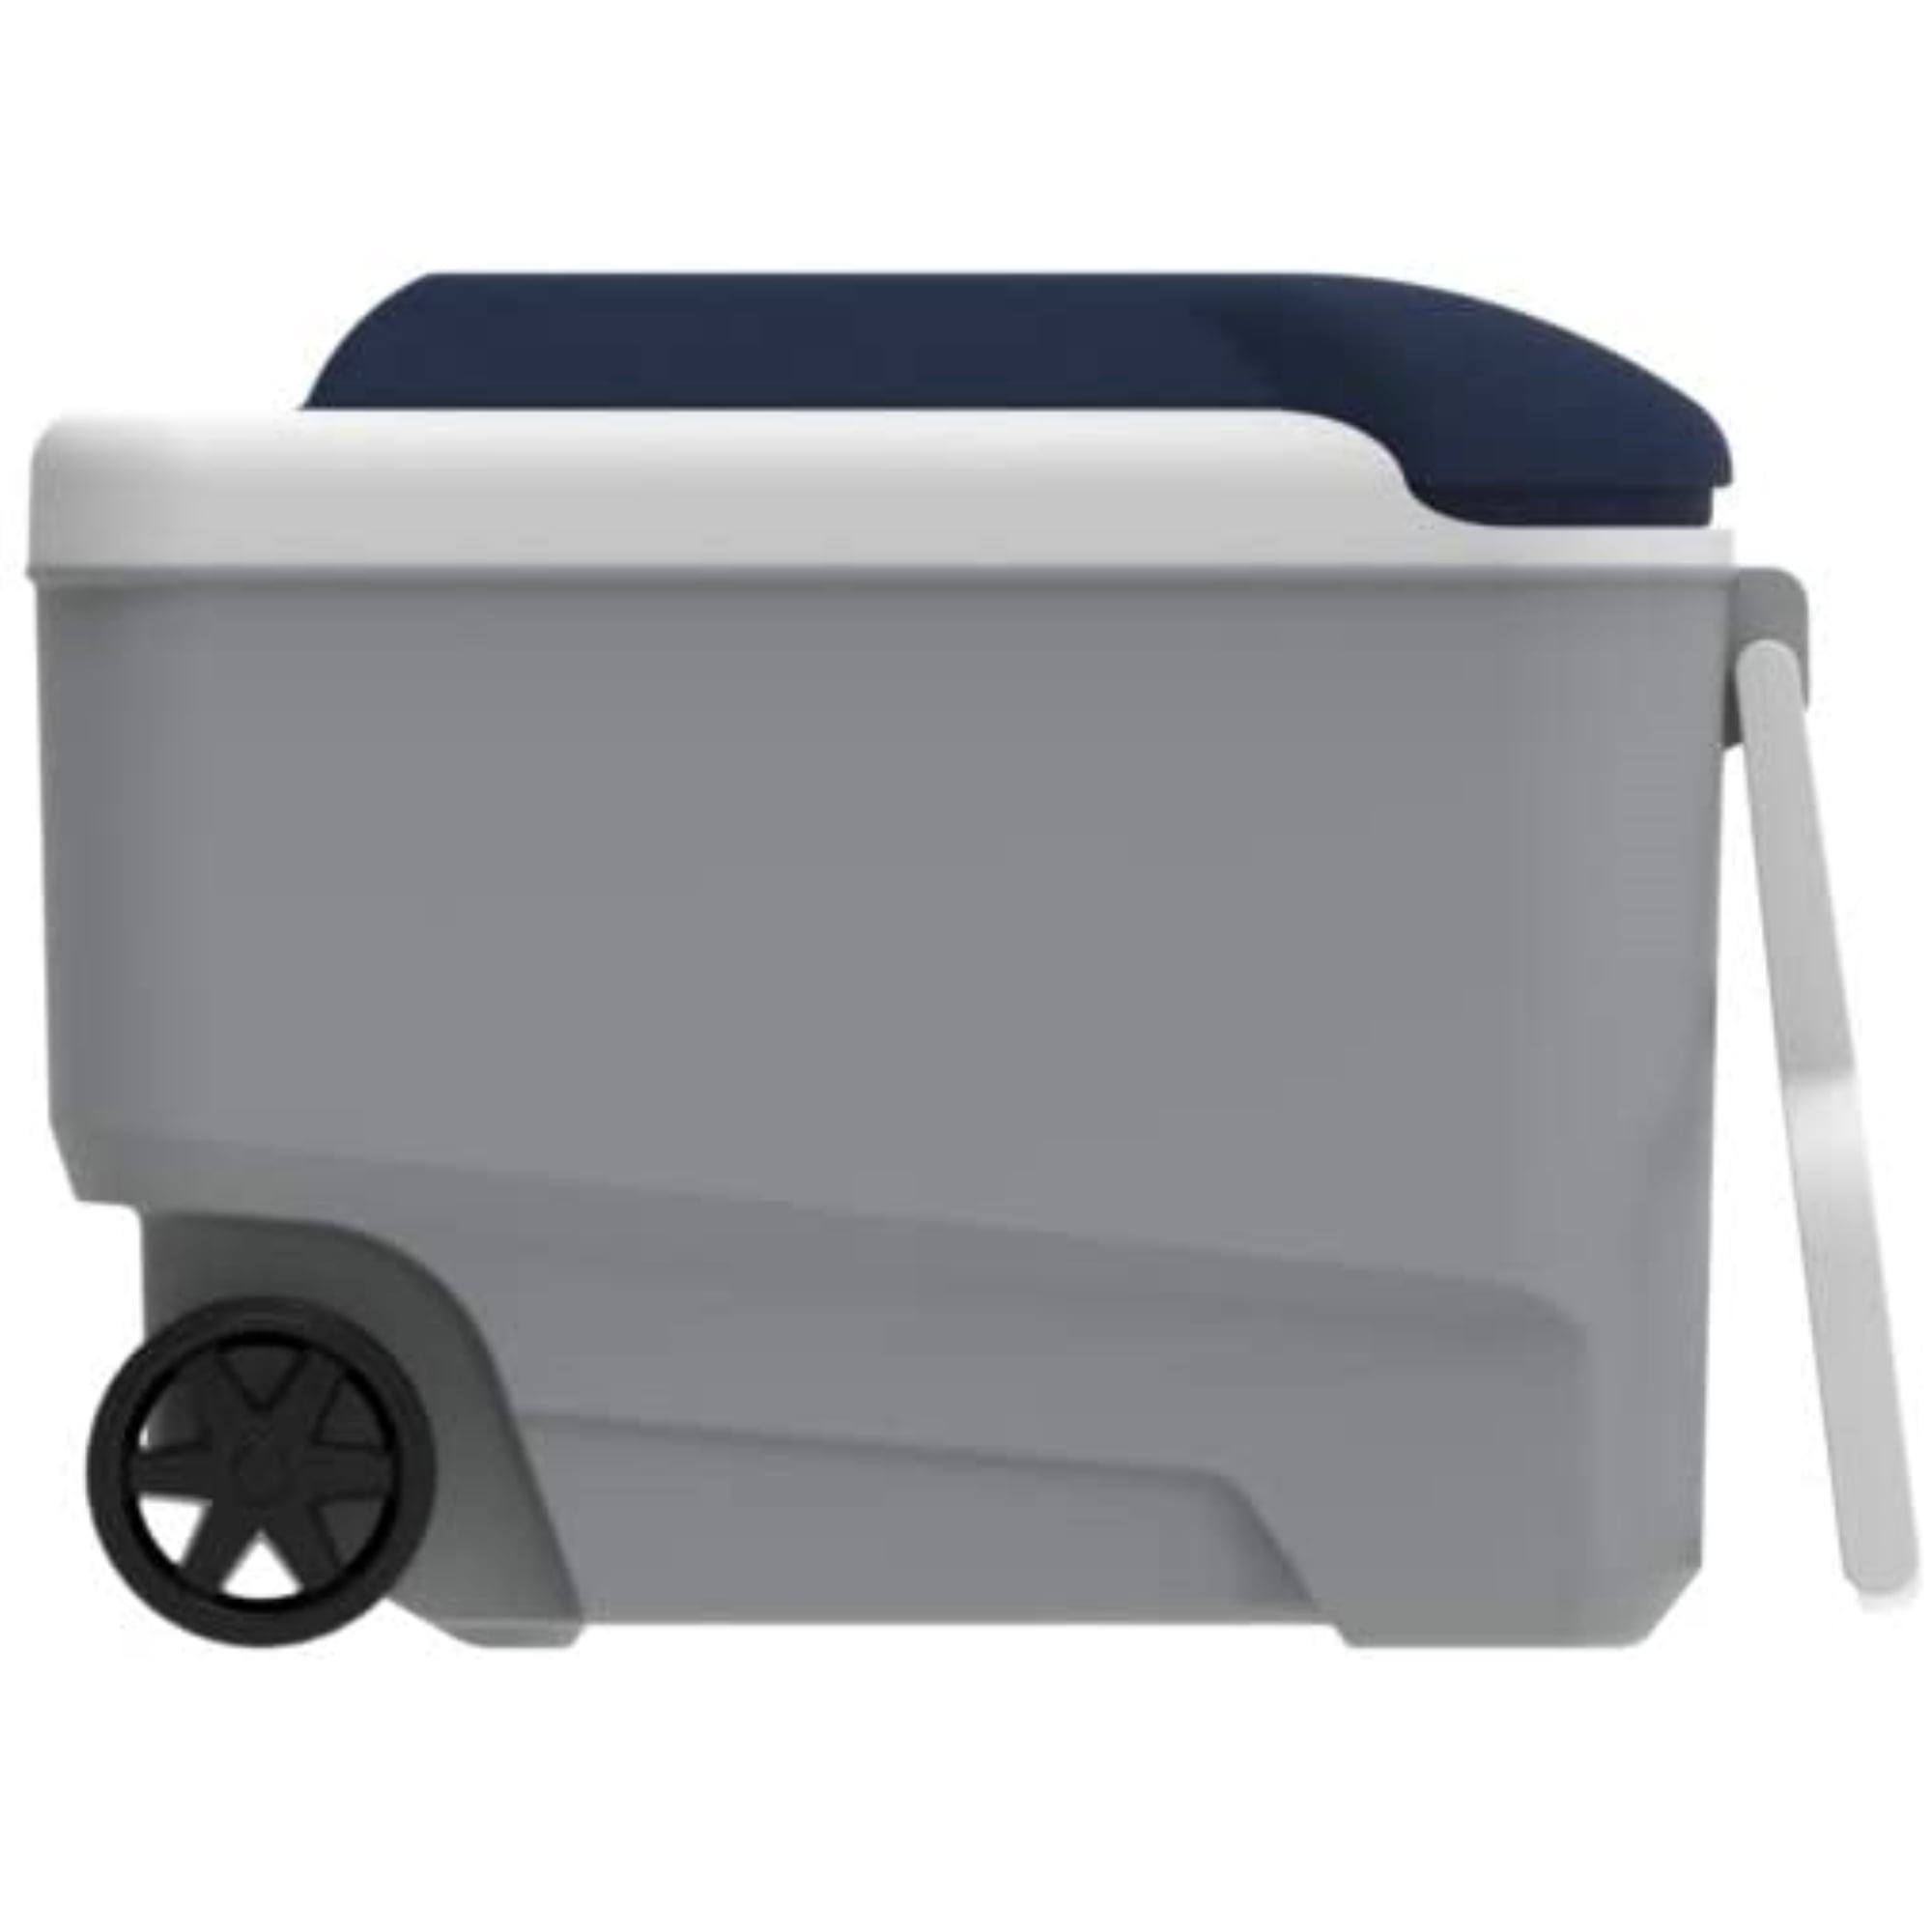 Igloo 40 Can MaxCold® Soft Cooler with Wheels, Gray